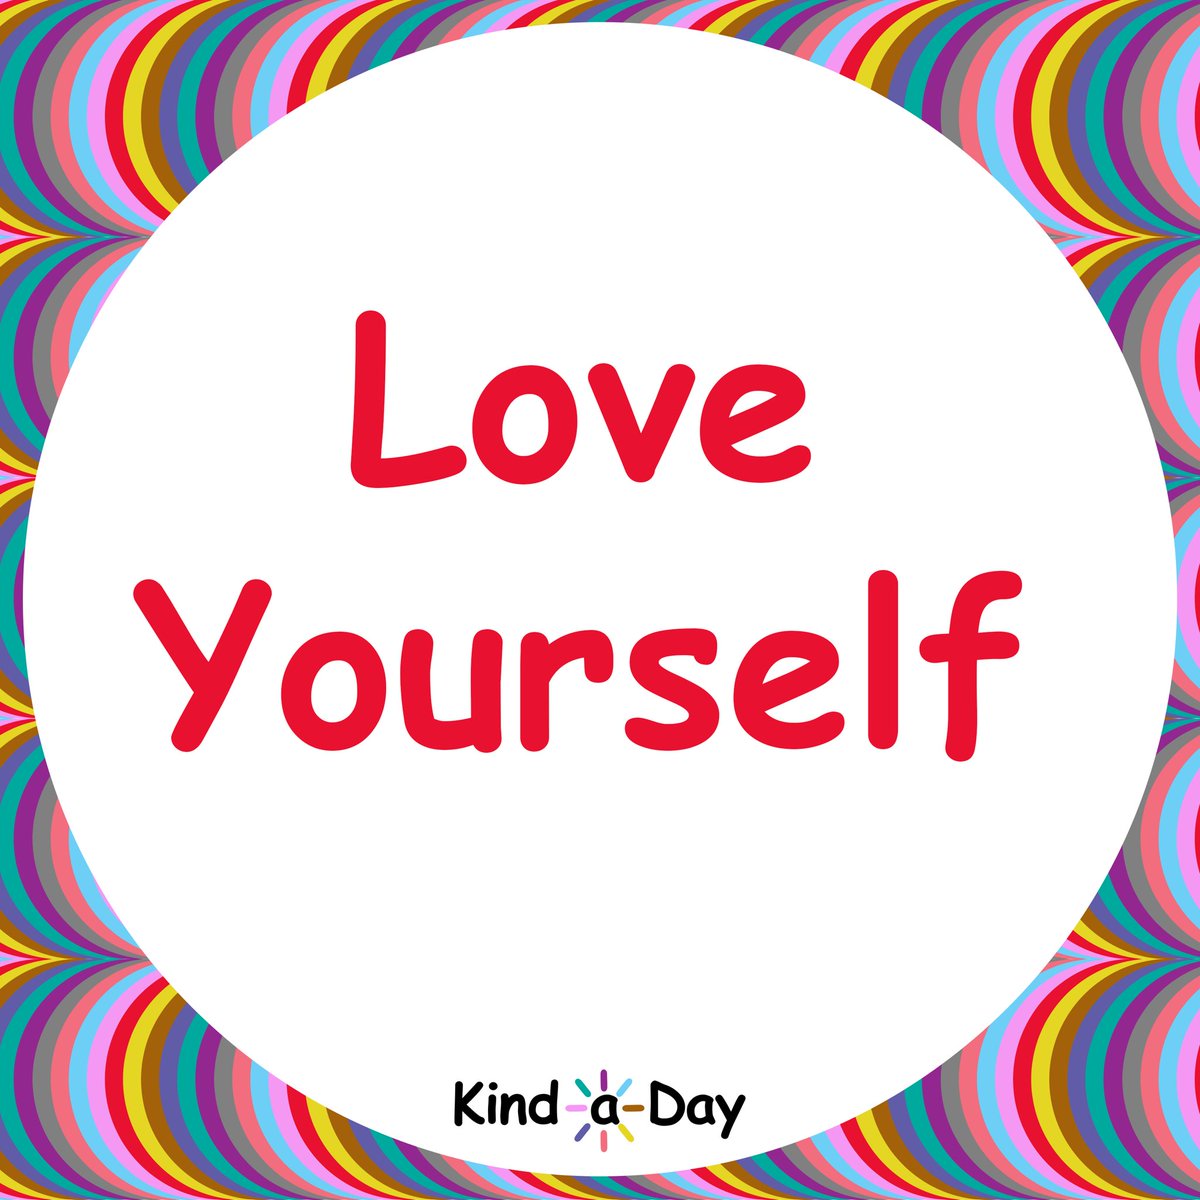 Tuesday Tip: Love yourself 💕
 
#Love #LoveYourself #BeKindToYourself #BeKind #kind #kindness #KindLife #ActsOfKindness #SpreadKindness #KindnessMatters #ChooseKindness #KindnessWins #KindaDay #KindnessAlways #KindnessEveryday #Kindness365 #KindnessChallenge #RandomActsOfKindness